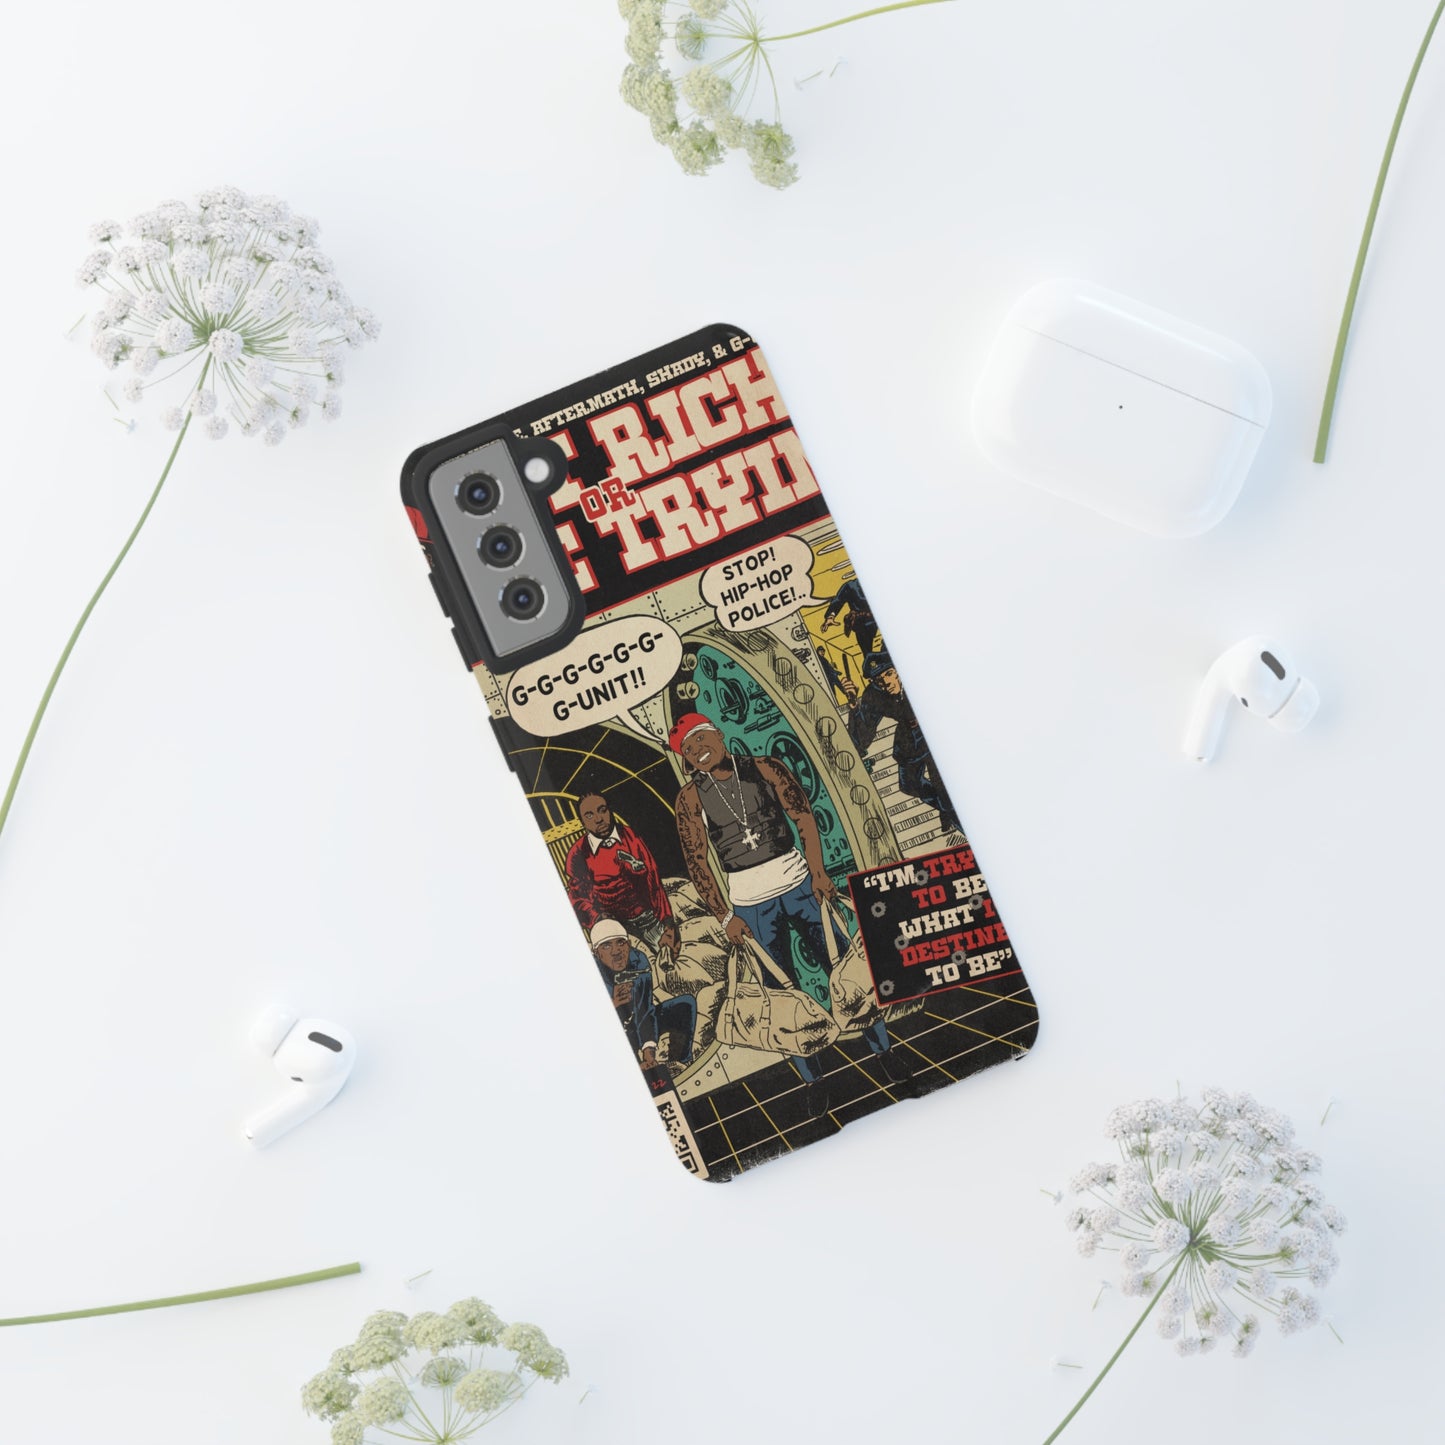 50 Cent - Get Rich Or Die Tryin - Comic Art Tough Phone Cases